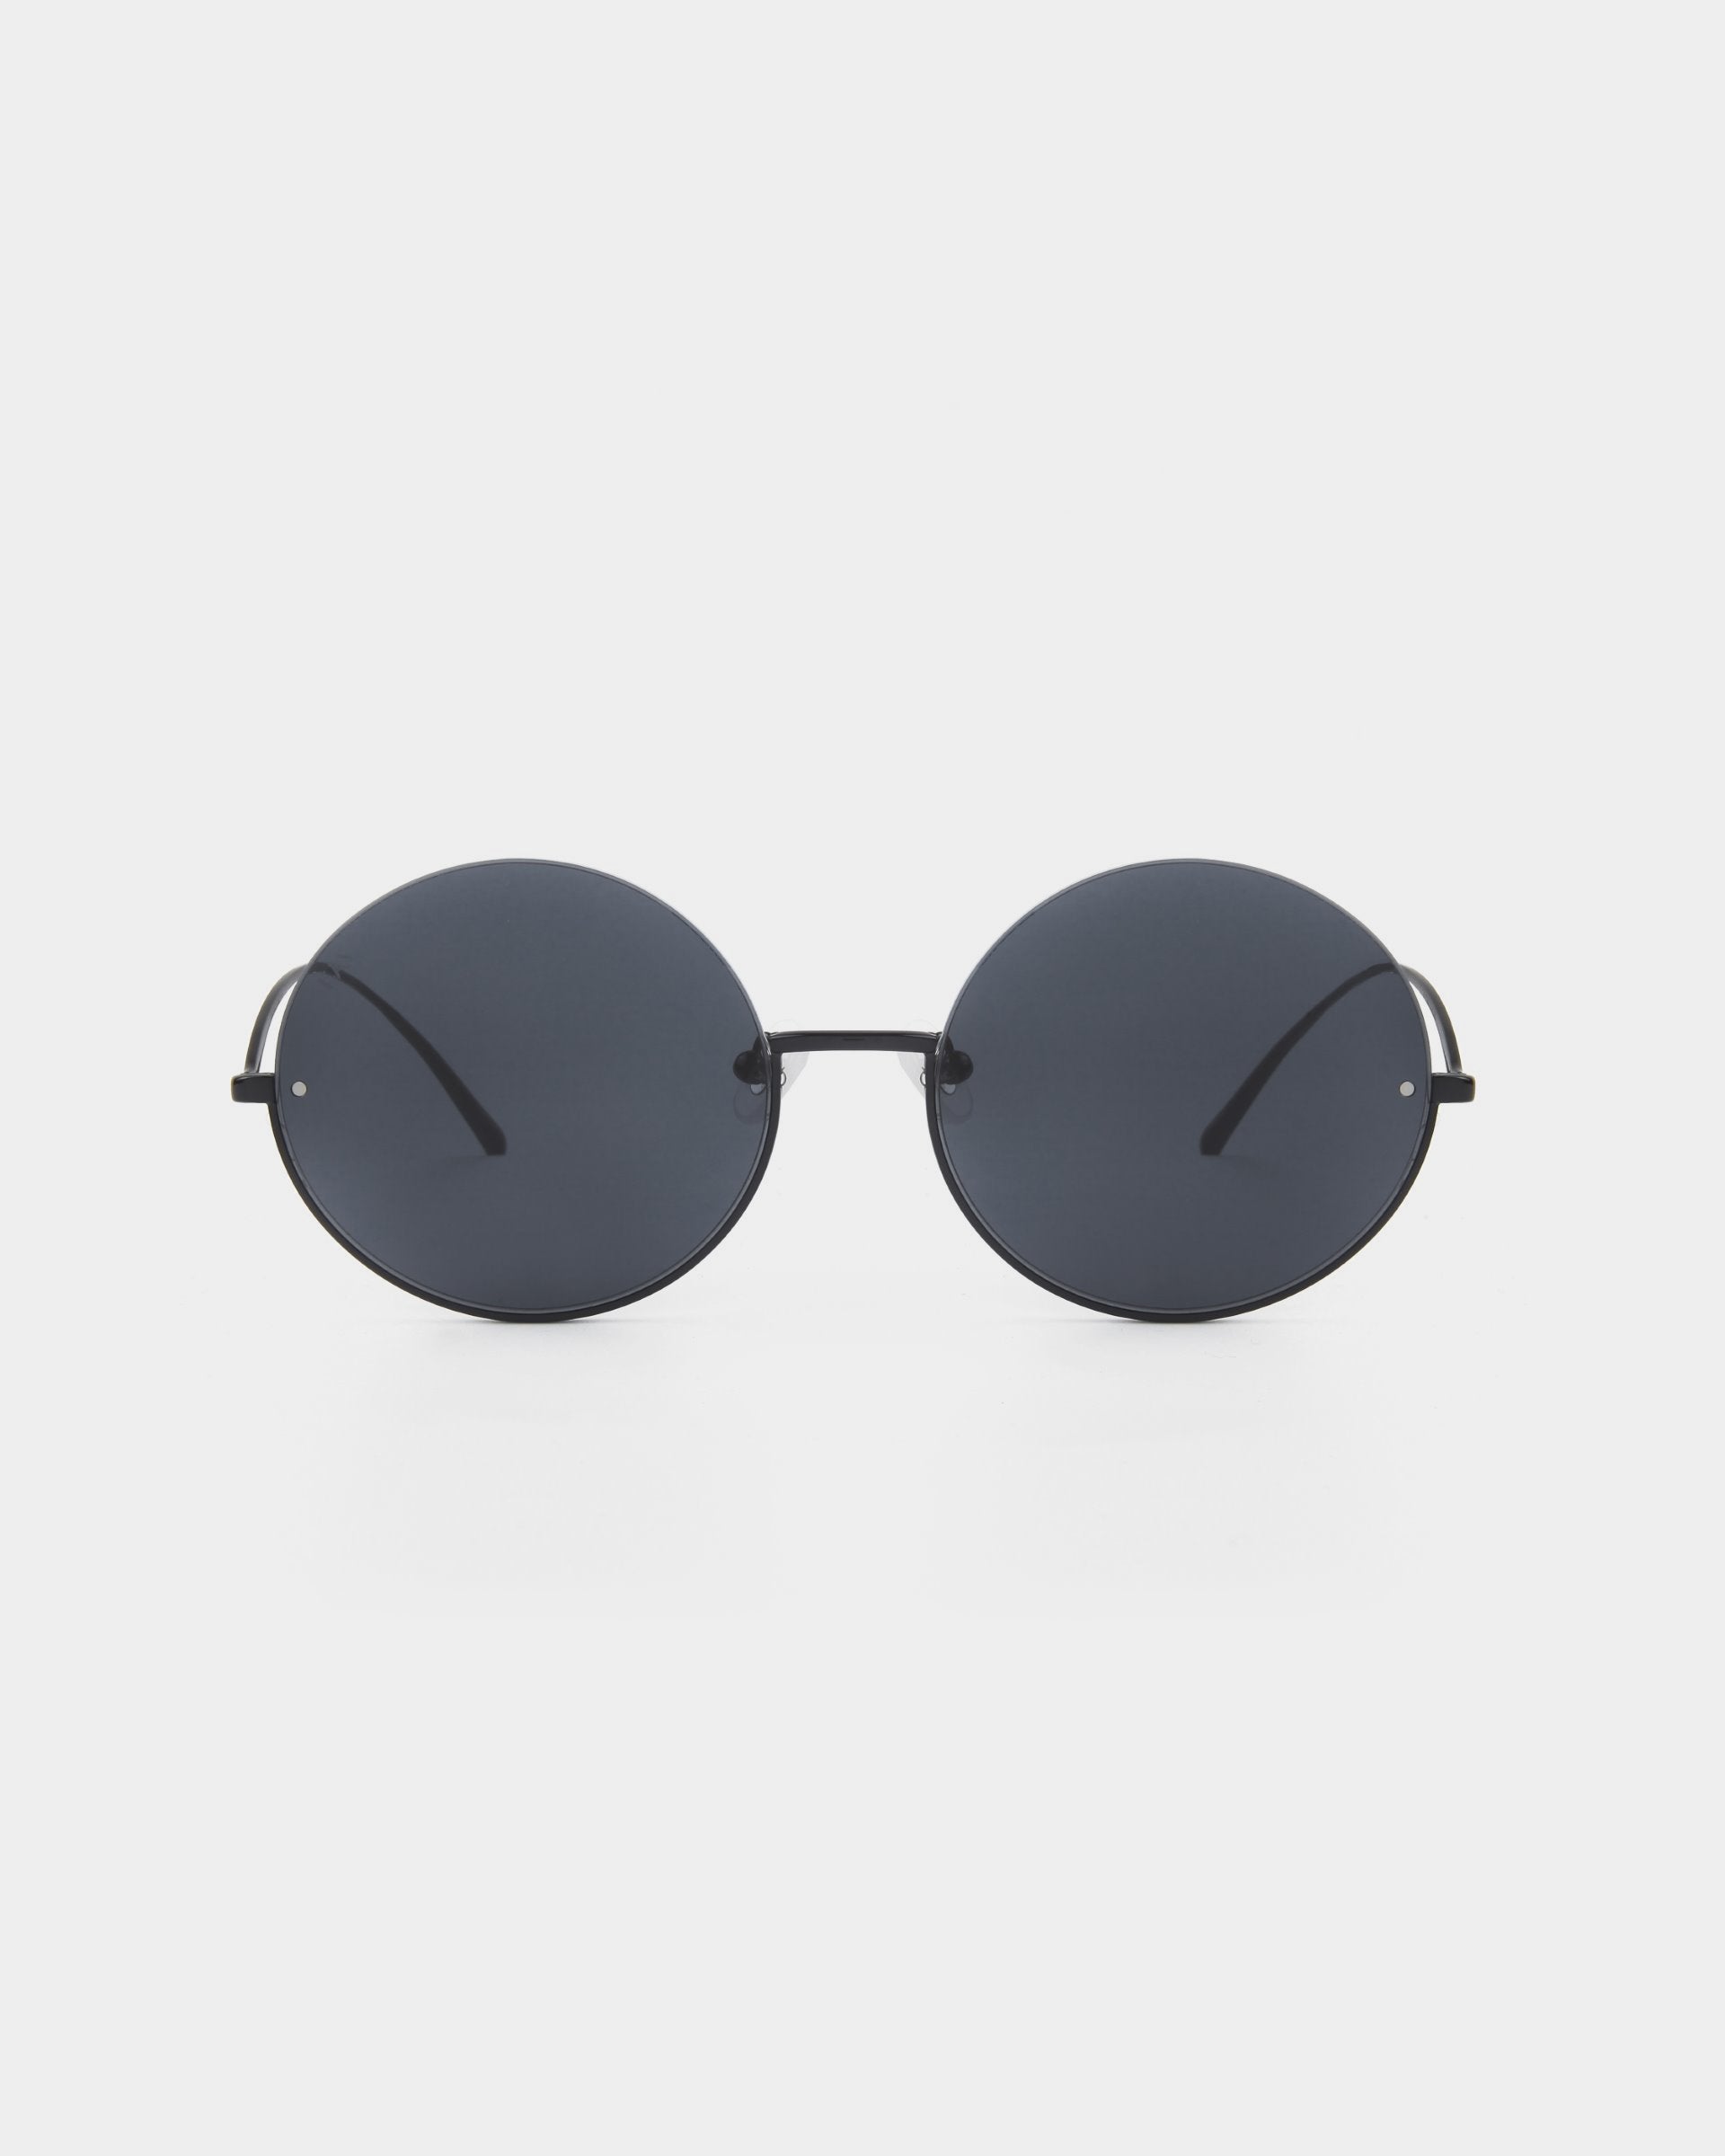 A pair of round, dark-tinted For Art&#39;s Sake® Oceana sunglasses with thin stainless steel frames is centered against a white background. The minimalist design features simple, straight temples and nose pads, giving them a sleek and modern look while offering UVA &amp; UVB protection.